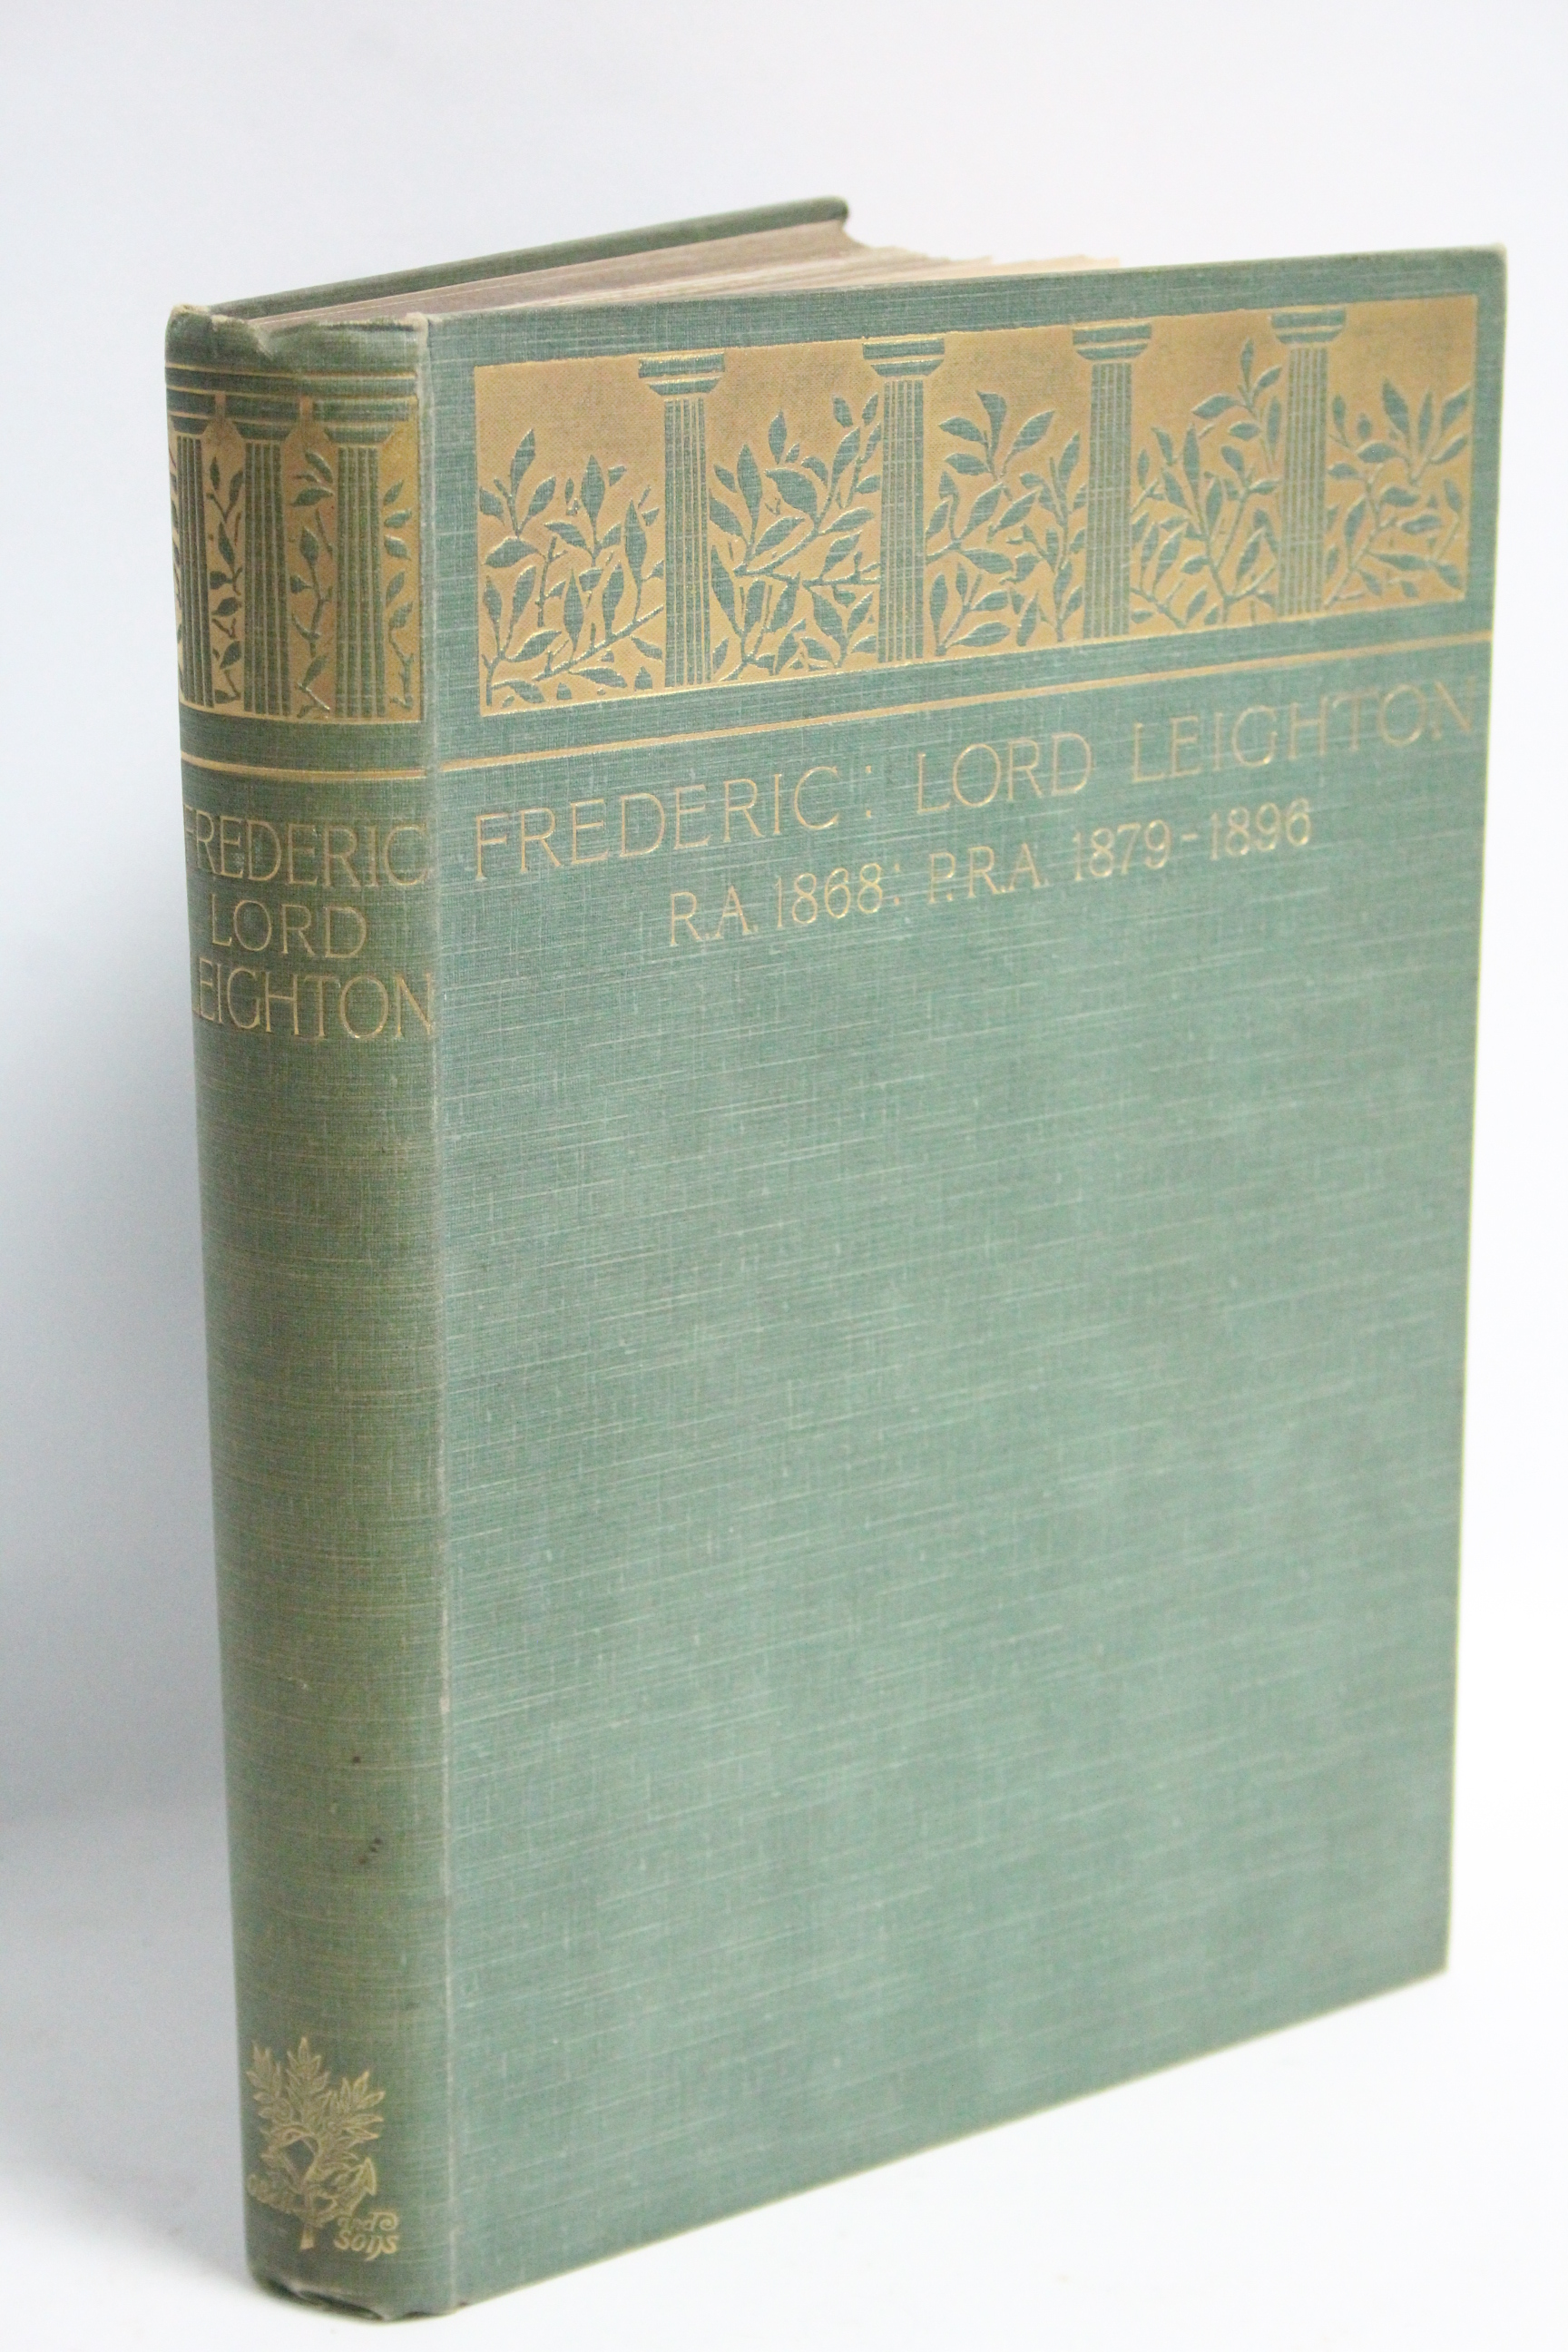 A late 19th century volume “Frederic Lord Leighton” (Late President of The Royal Academy of Arts” by